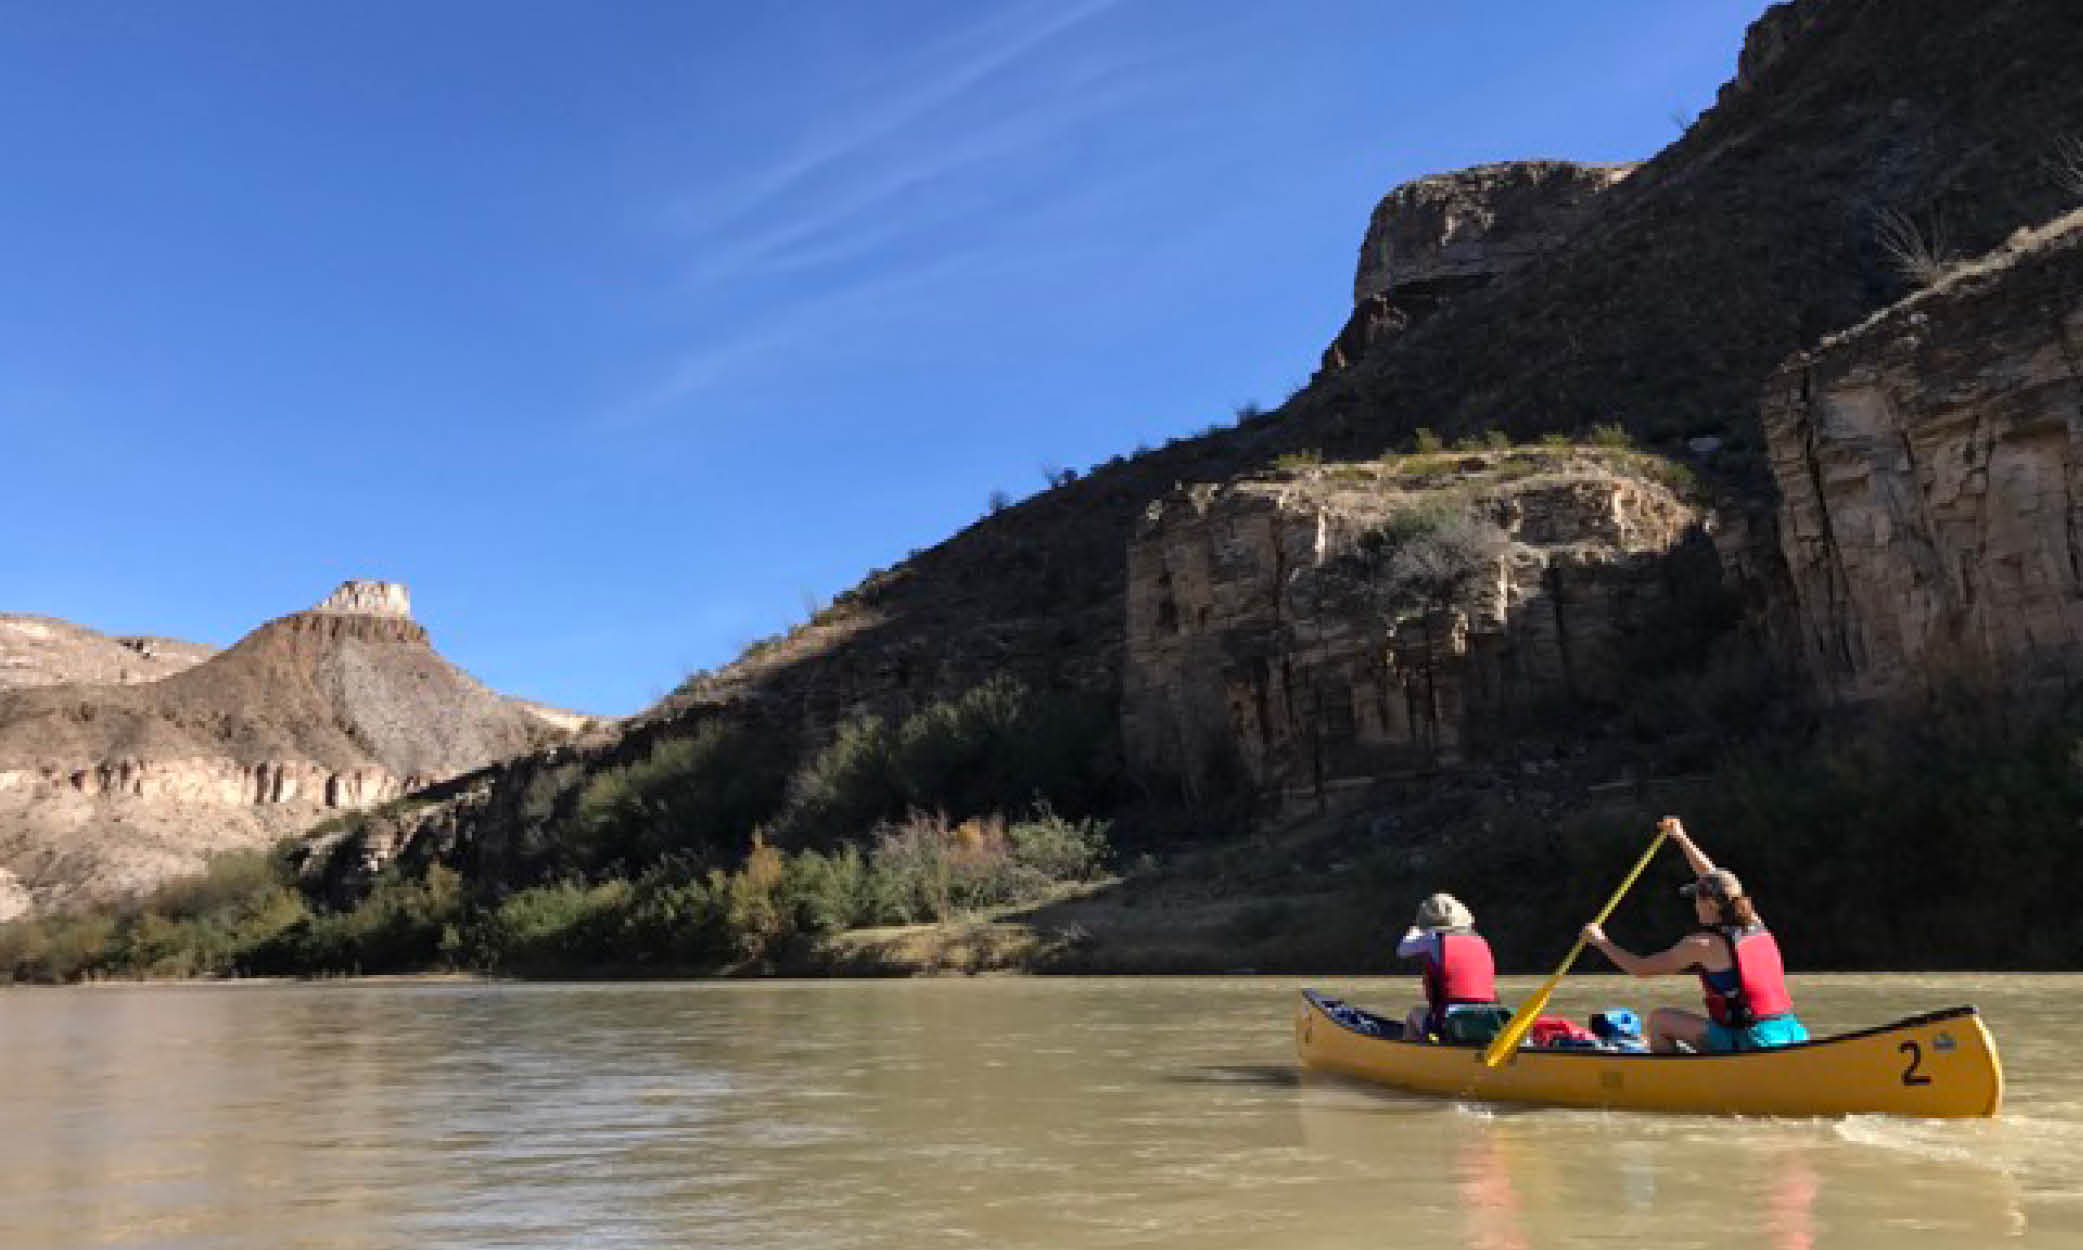 Two people on a canoe trip in Big Bend Canyons